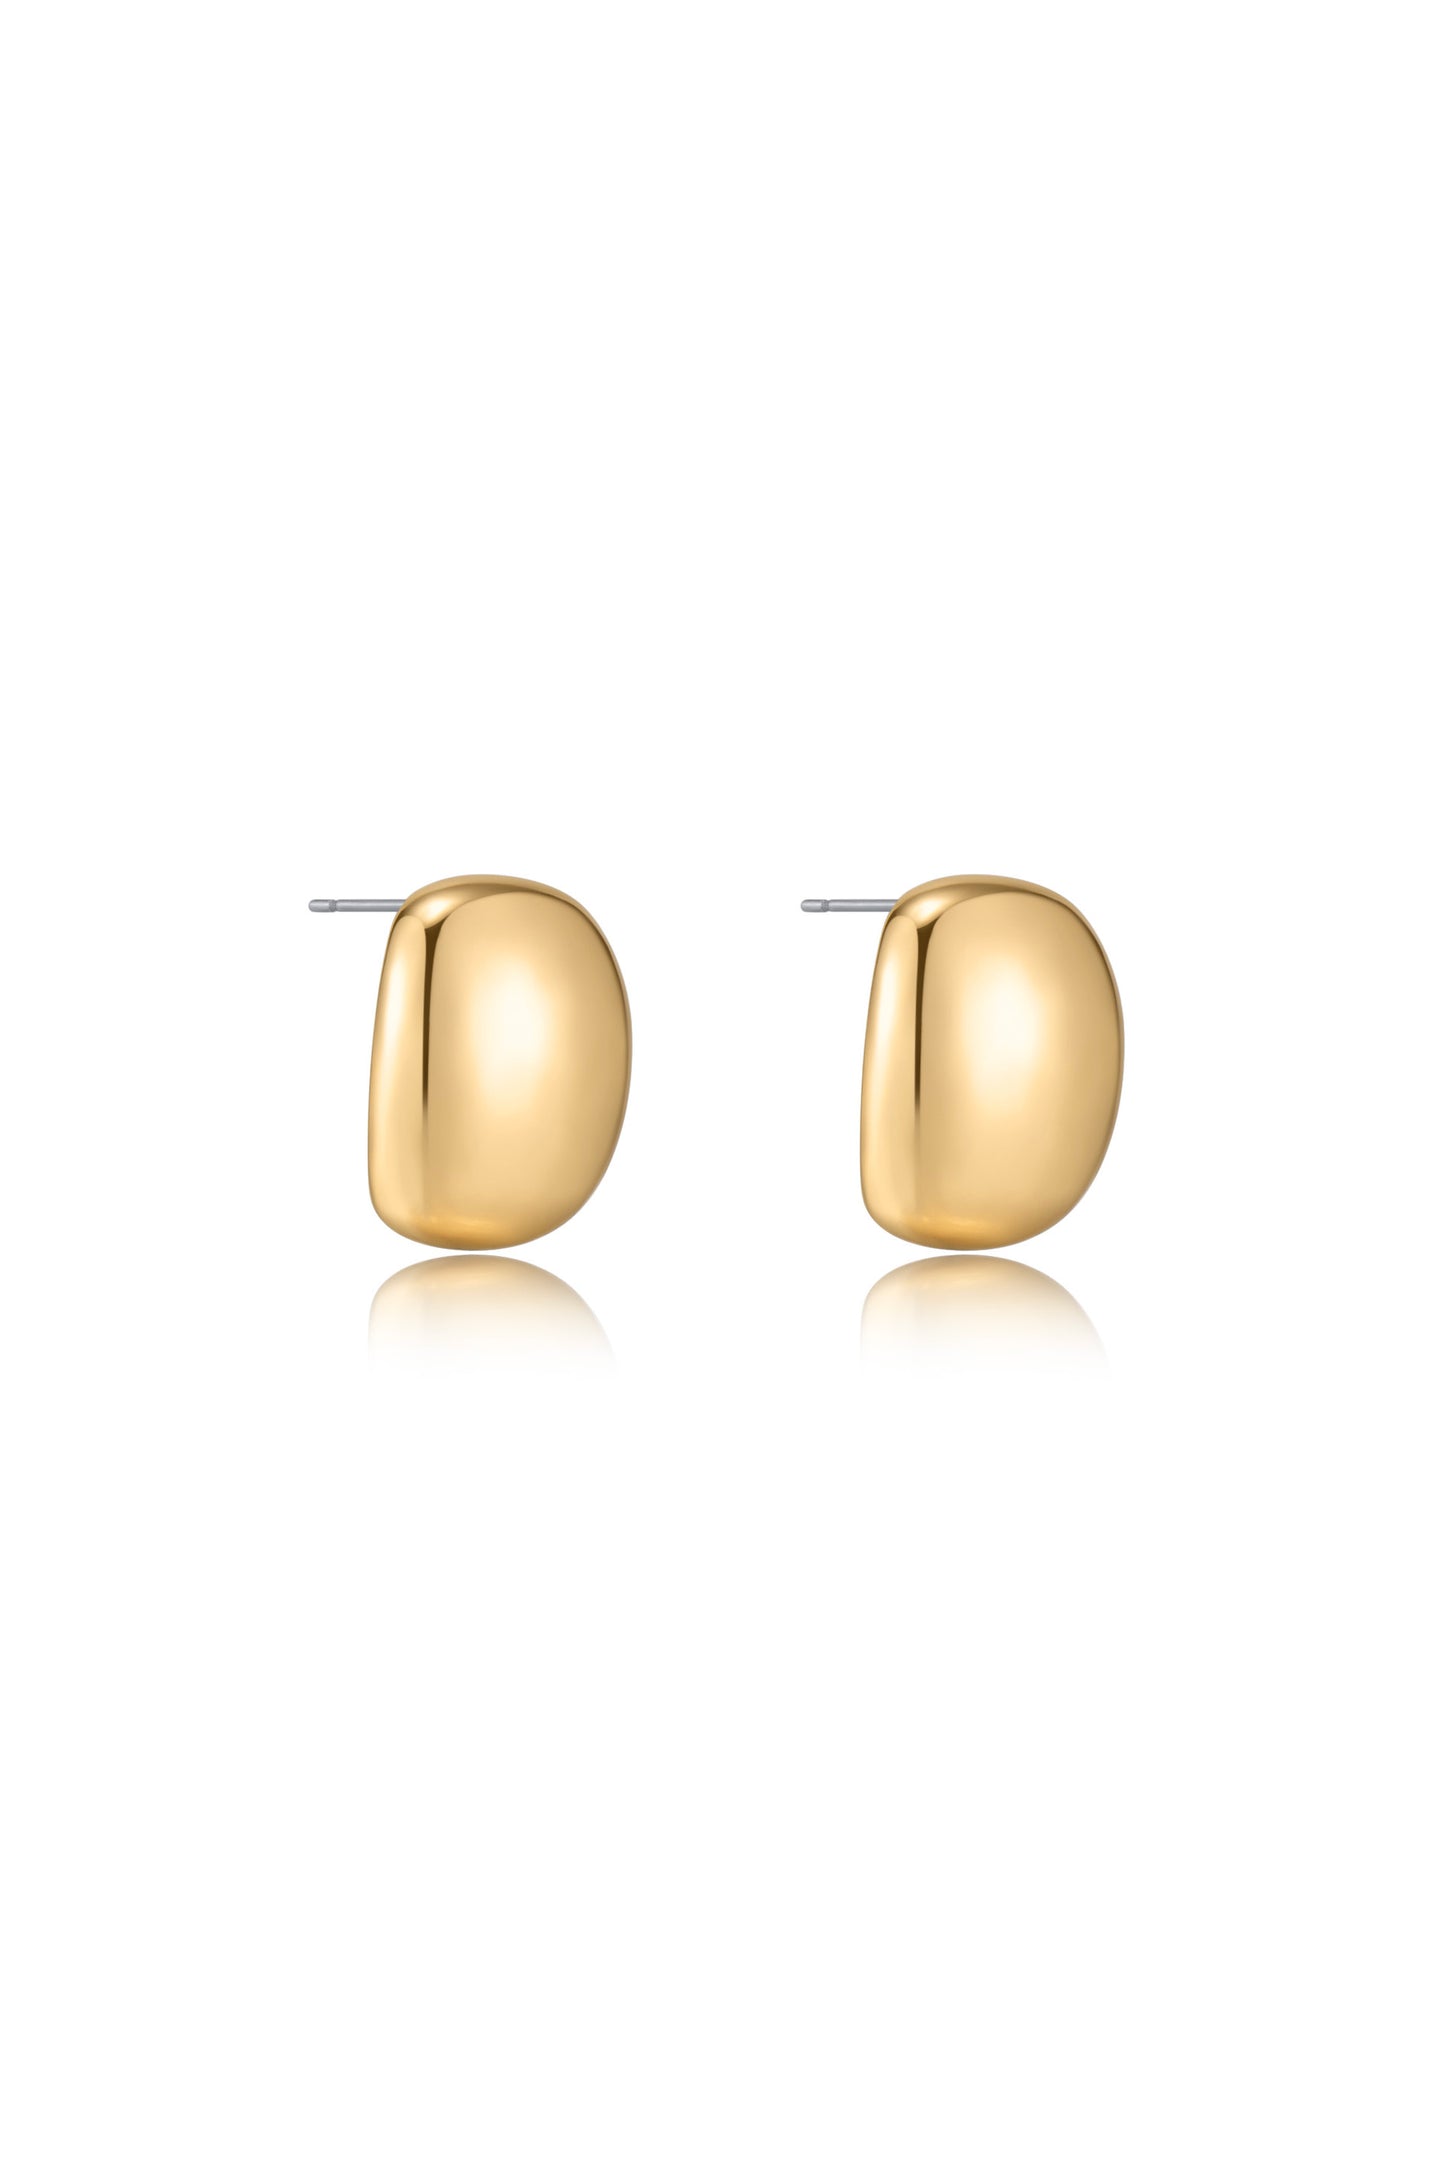 Minimal Curved Square Stud Earrings in gold side view